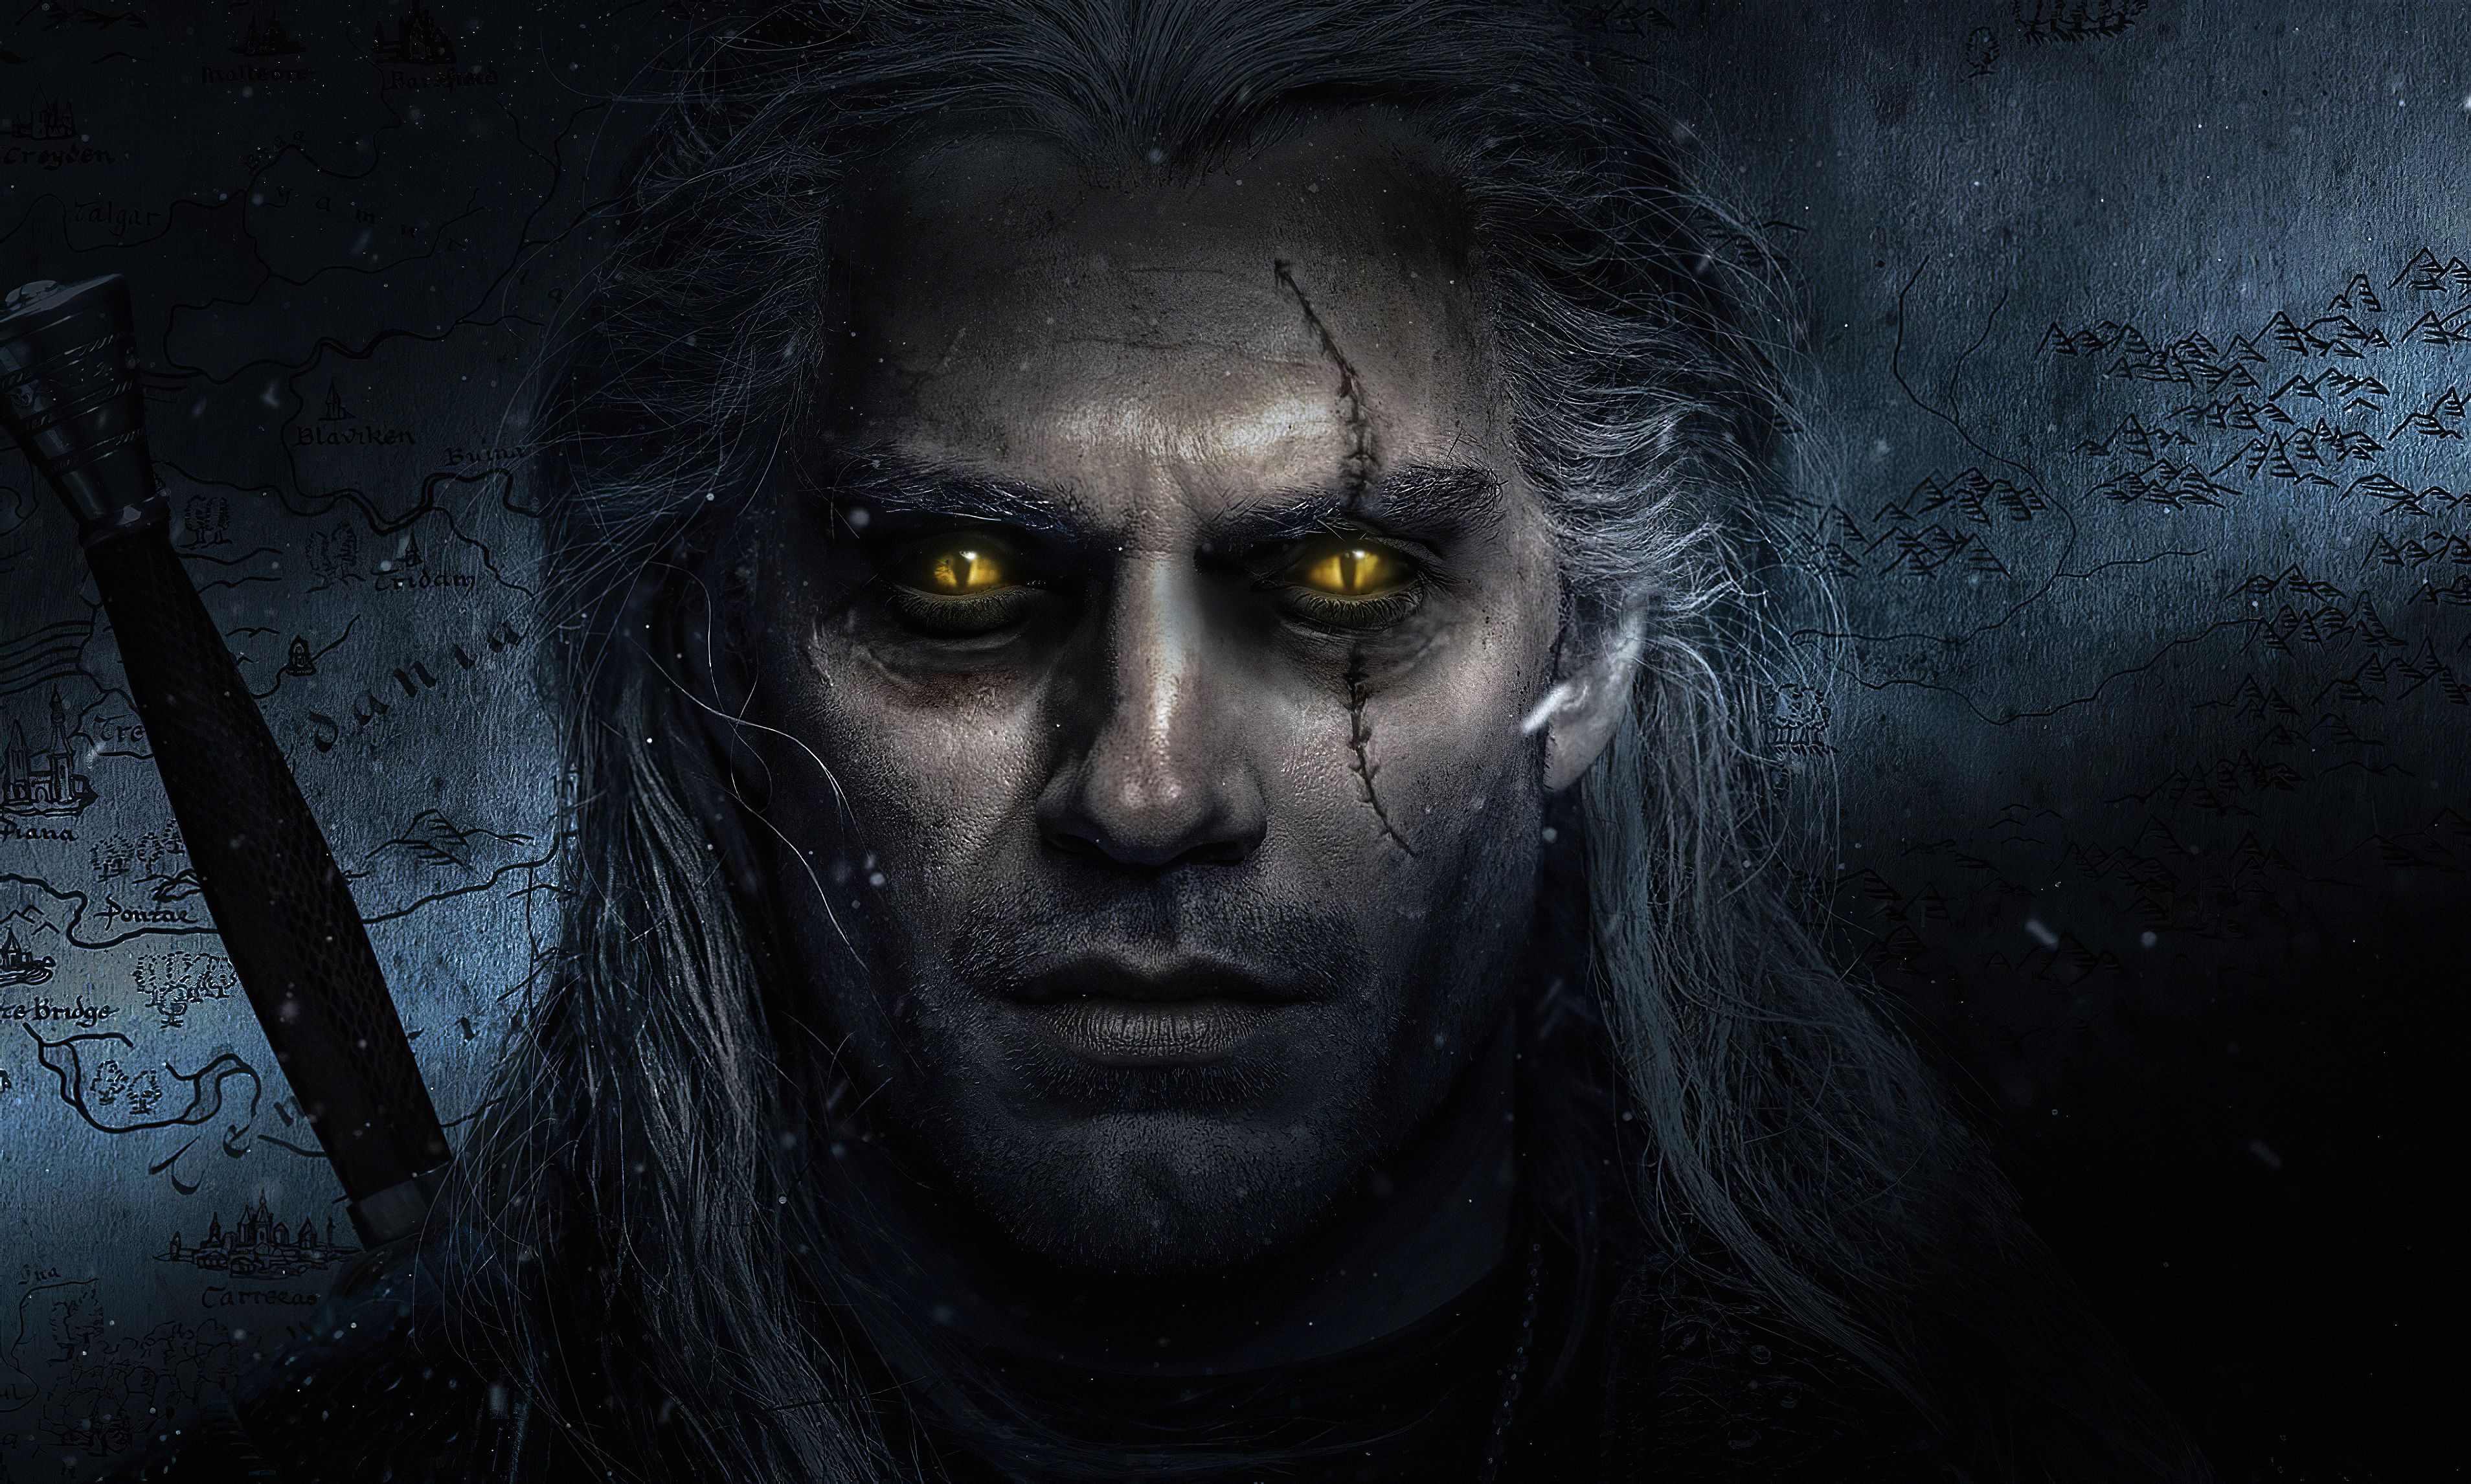 The Witcher Henry Cavill 4k Tv Series, HD Tv Shows, 4k Wallpapers